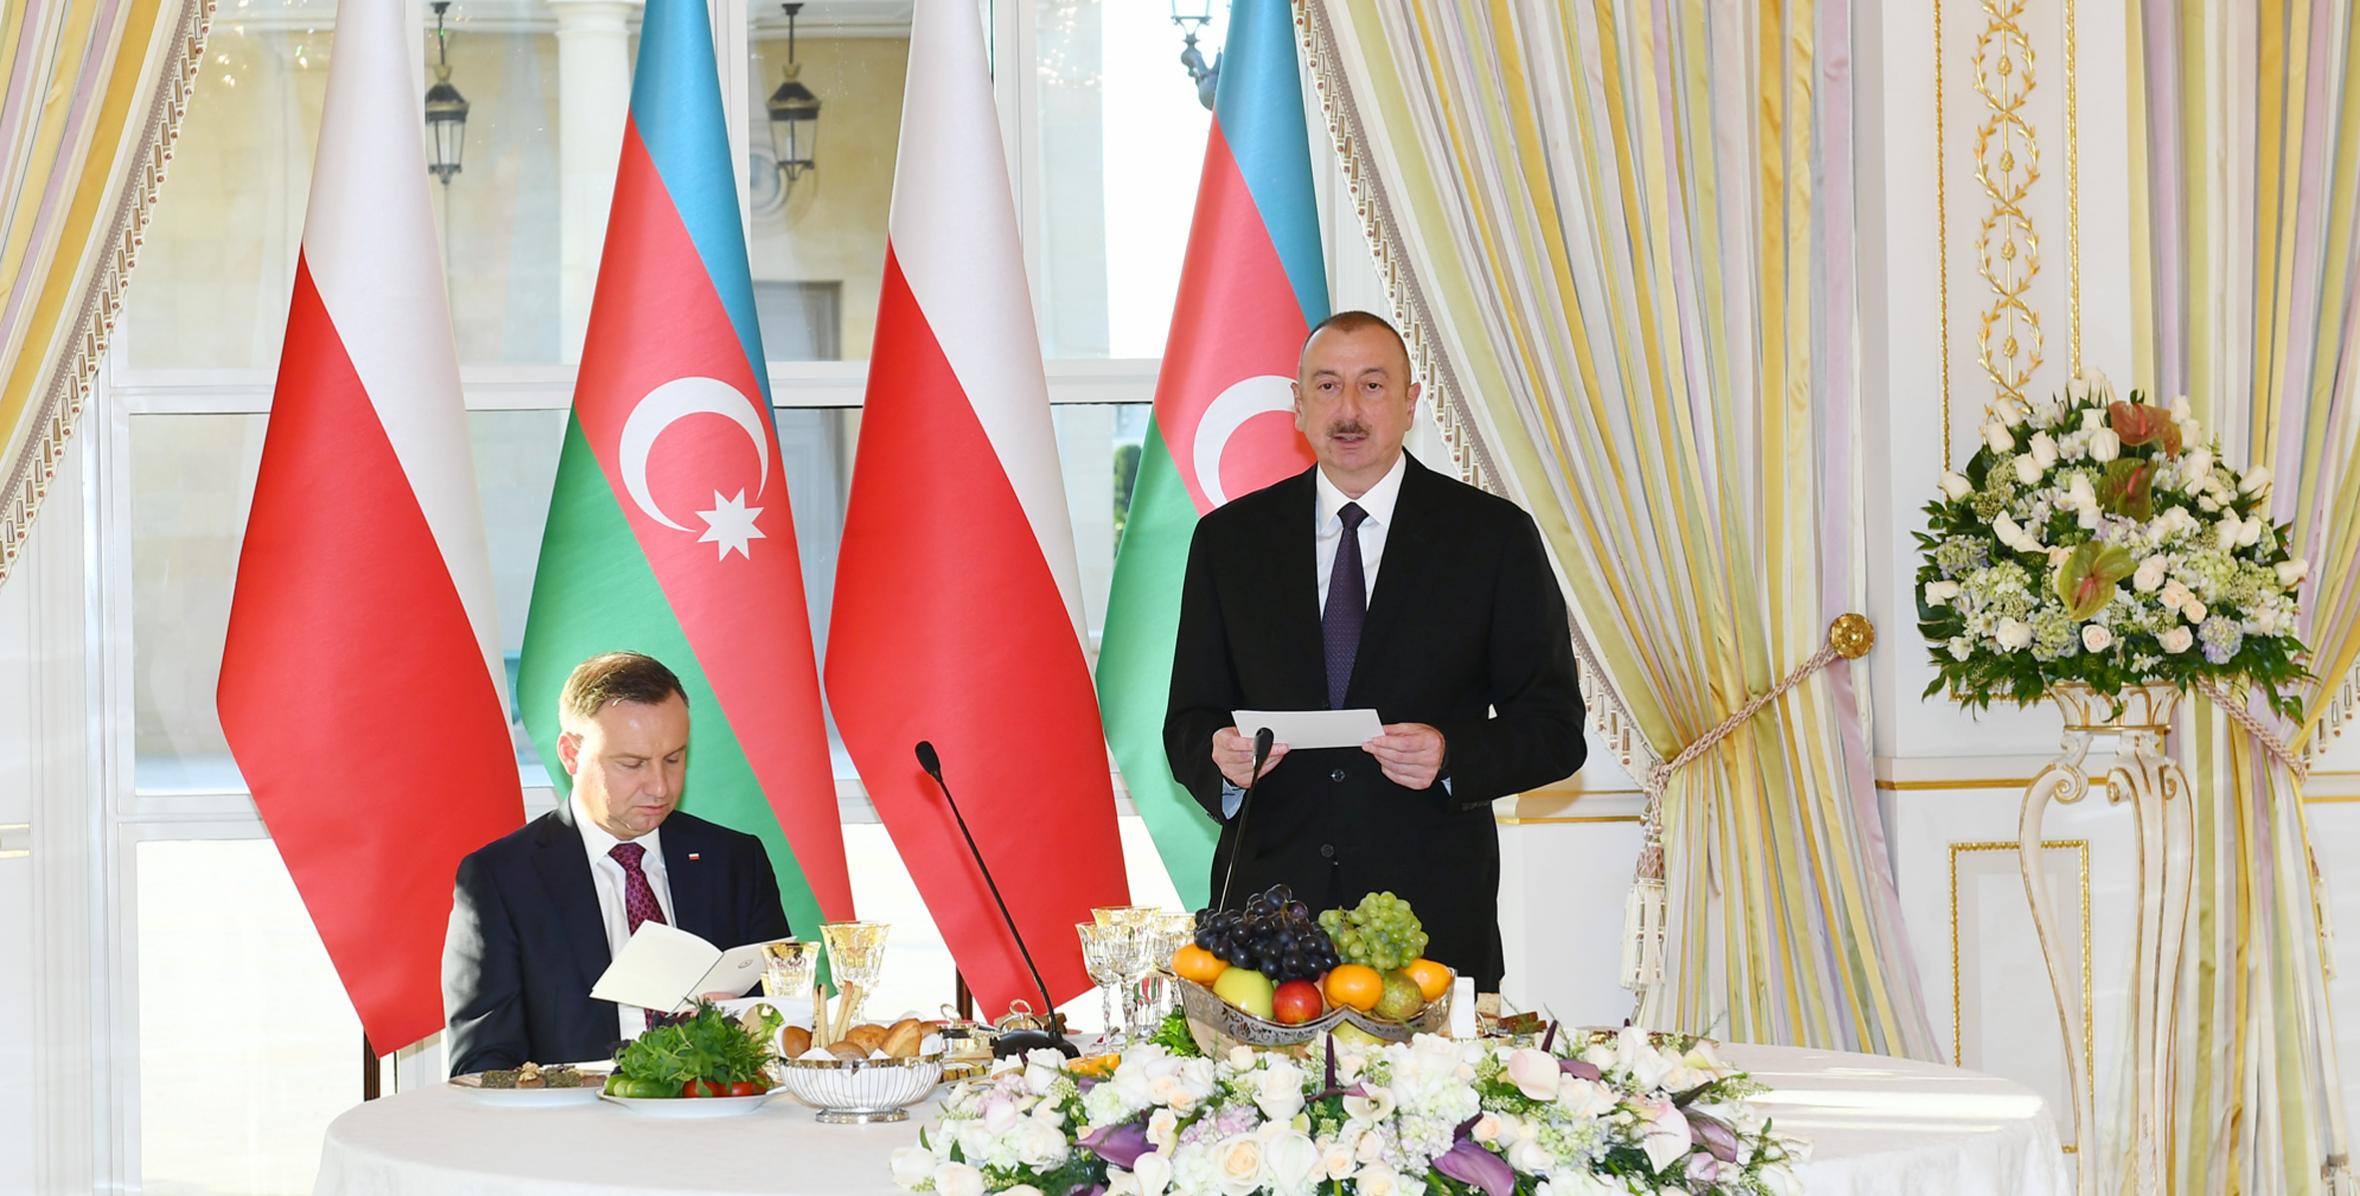 Ilham Aliyev hosted official reception in honor of Polish President Andrzej Duda